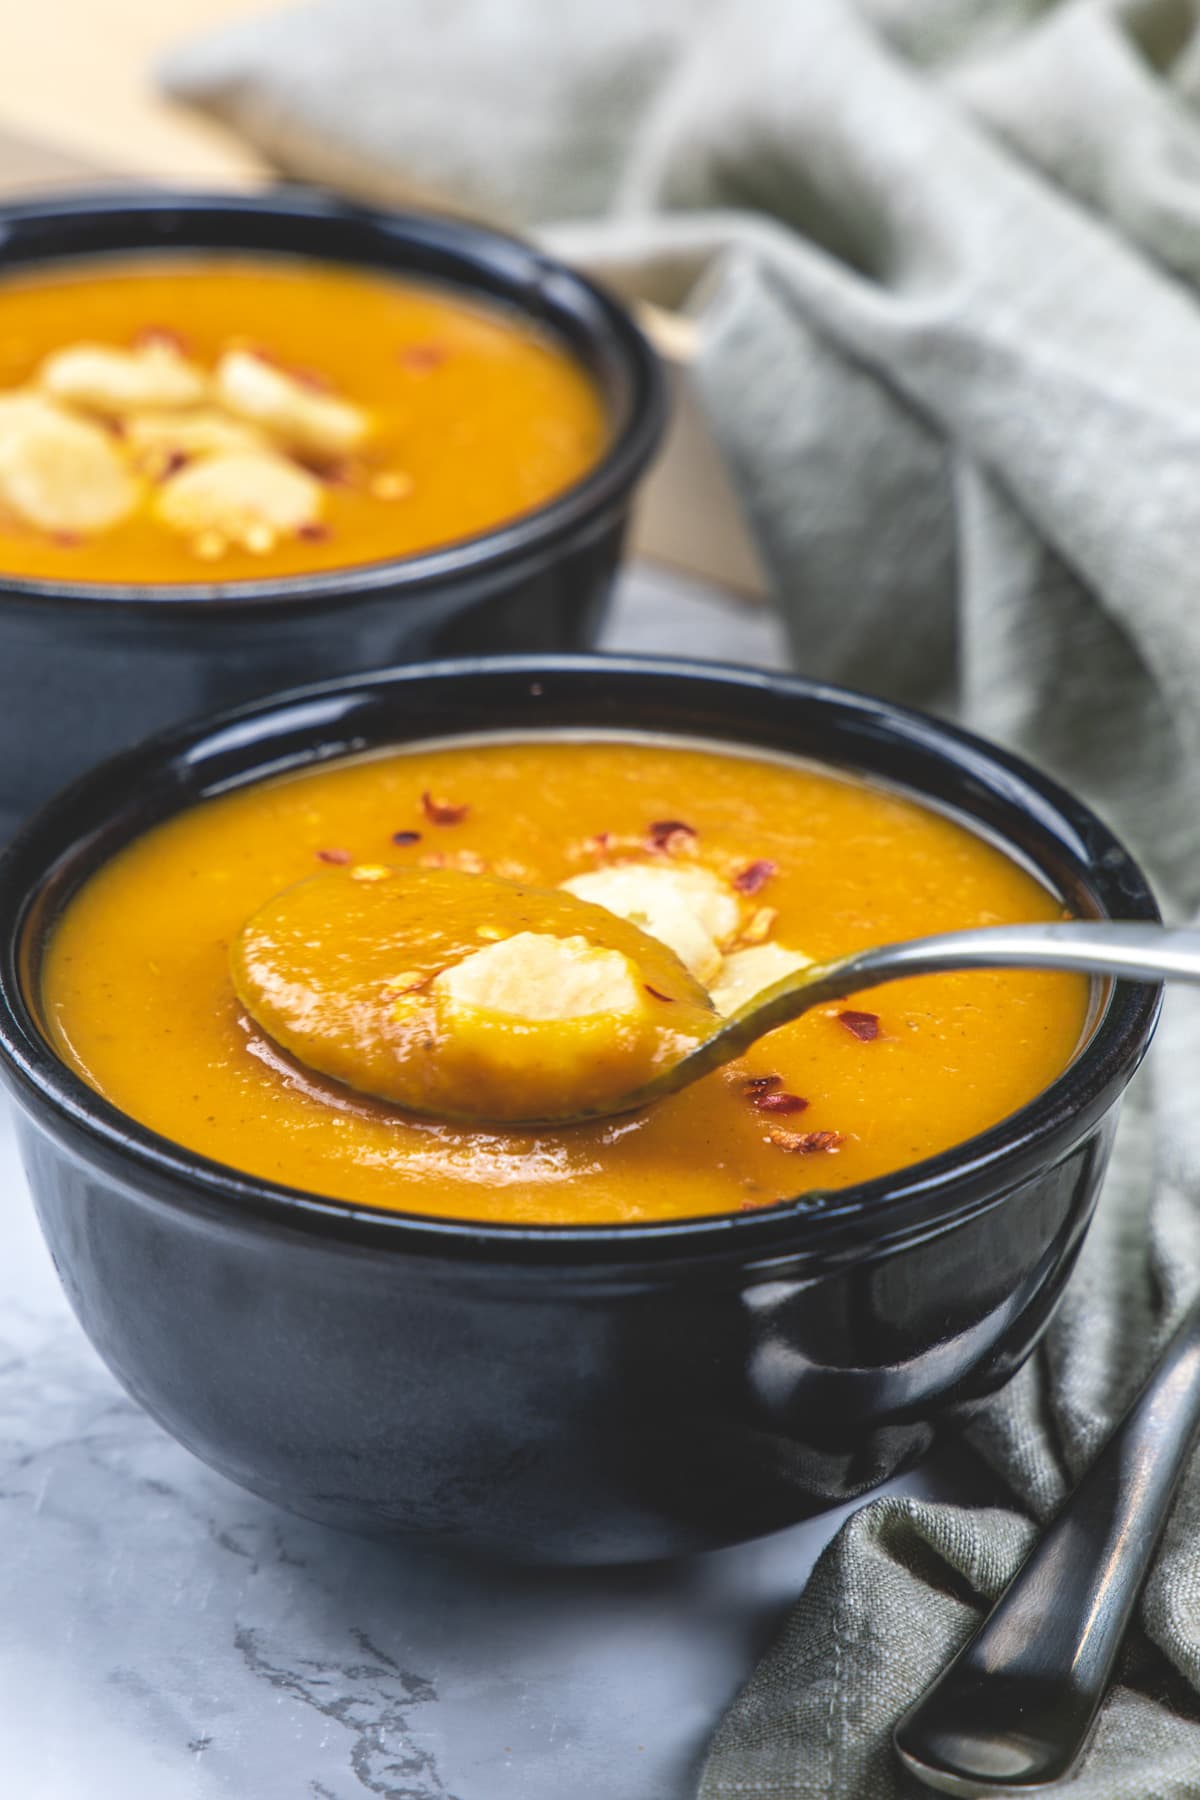 a spoonful of carrot tomato soup is taken from the bowl and another bowl in the back.